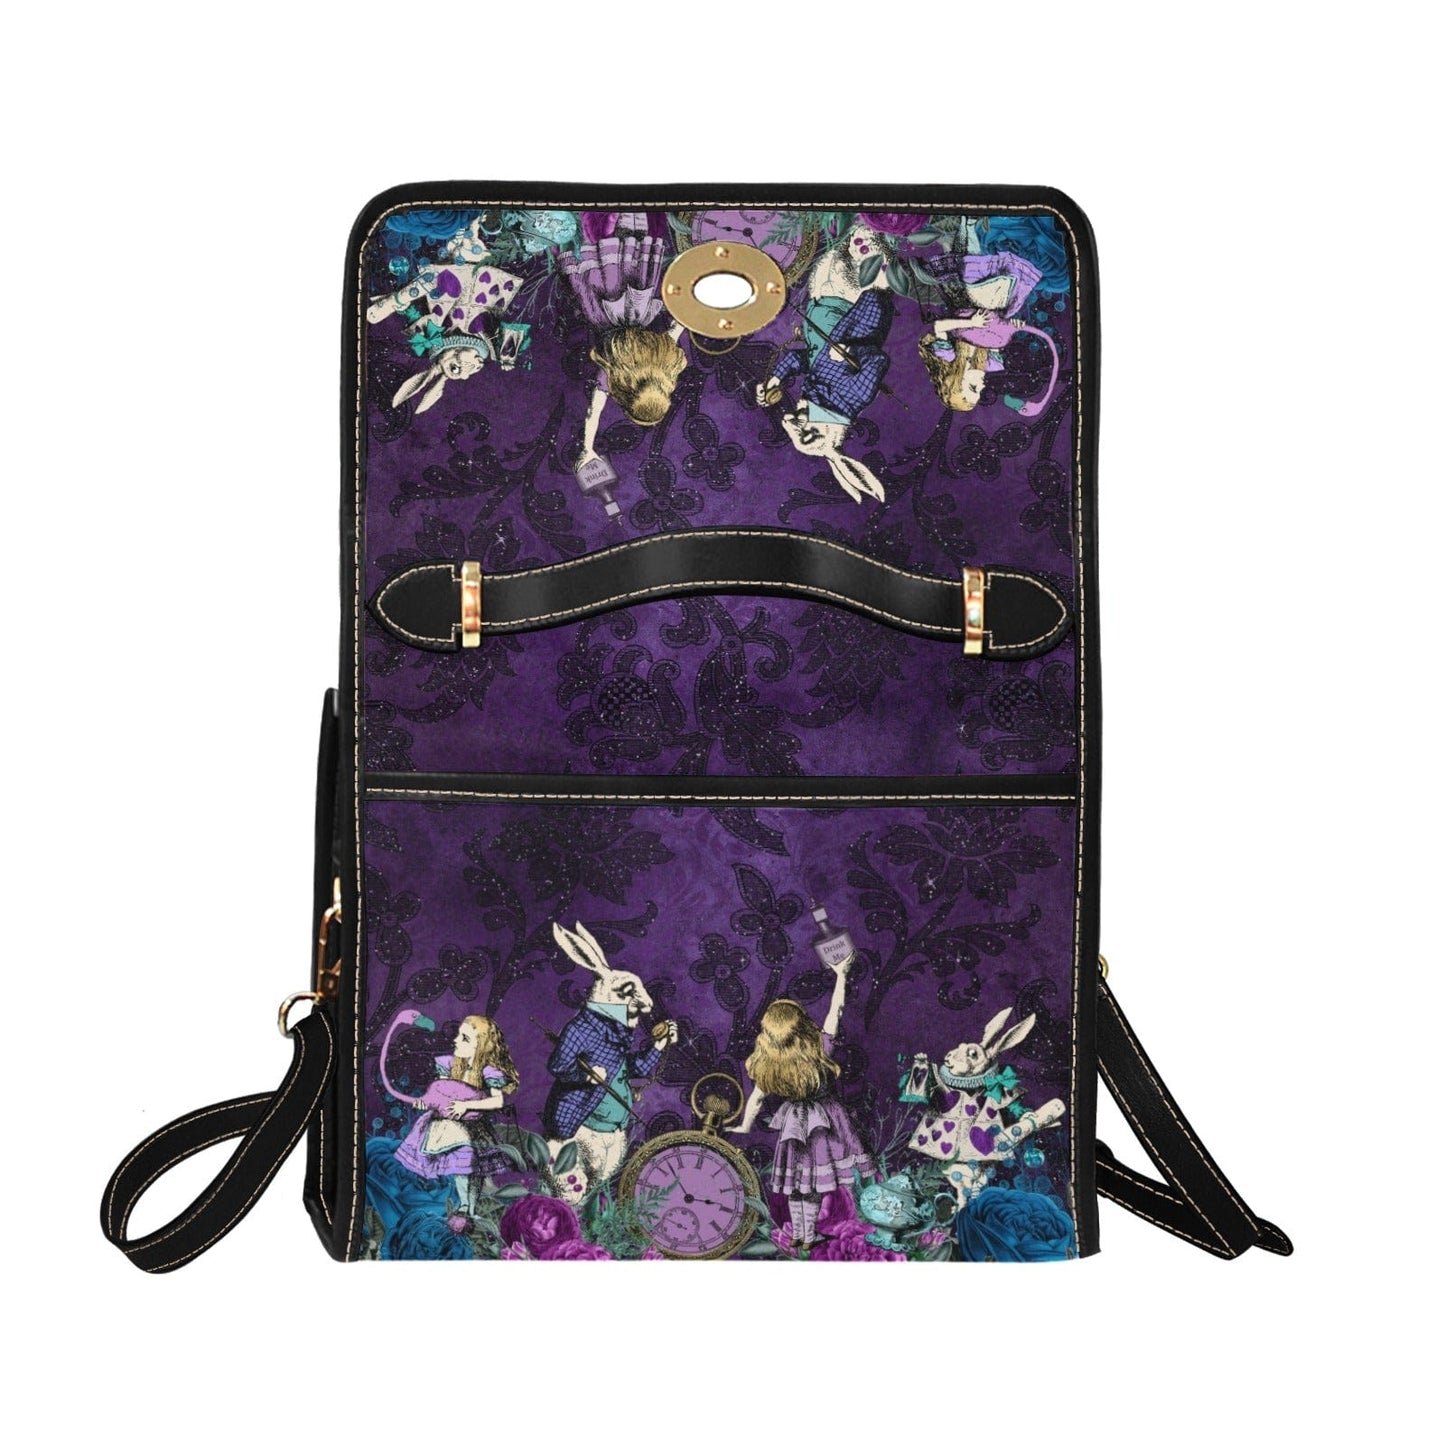 back view with top flap extended upwards on the Purple damask background on an Alice in wonderland themed gothic satchel handbag featuring the White Rabbit at Gallery Serpentine